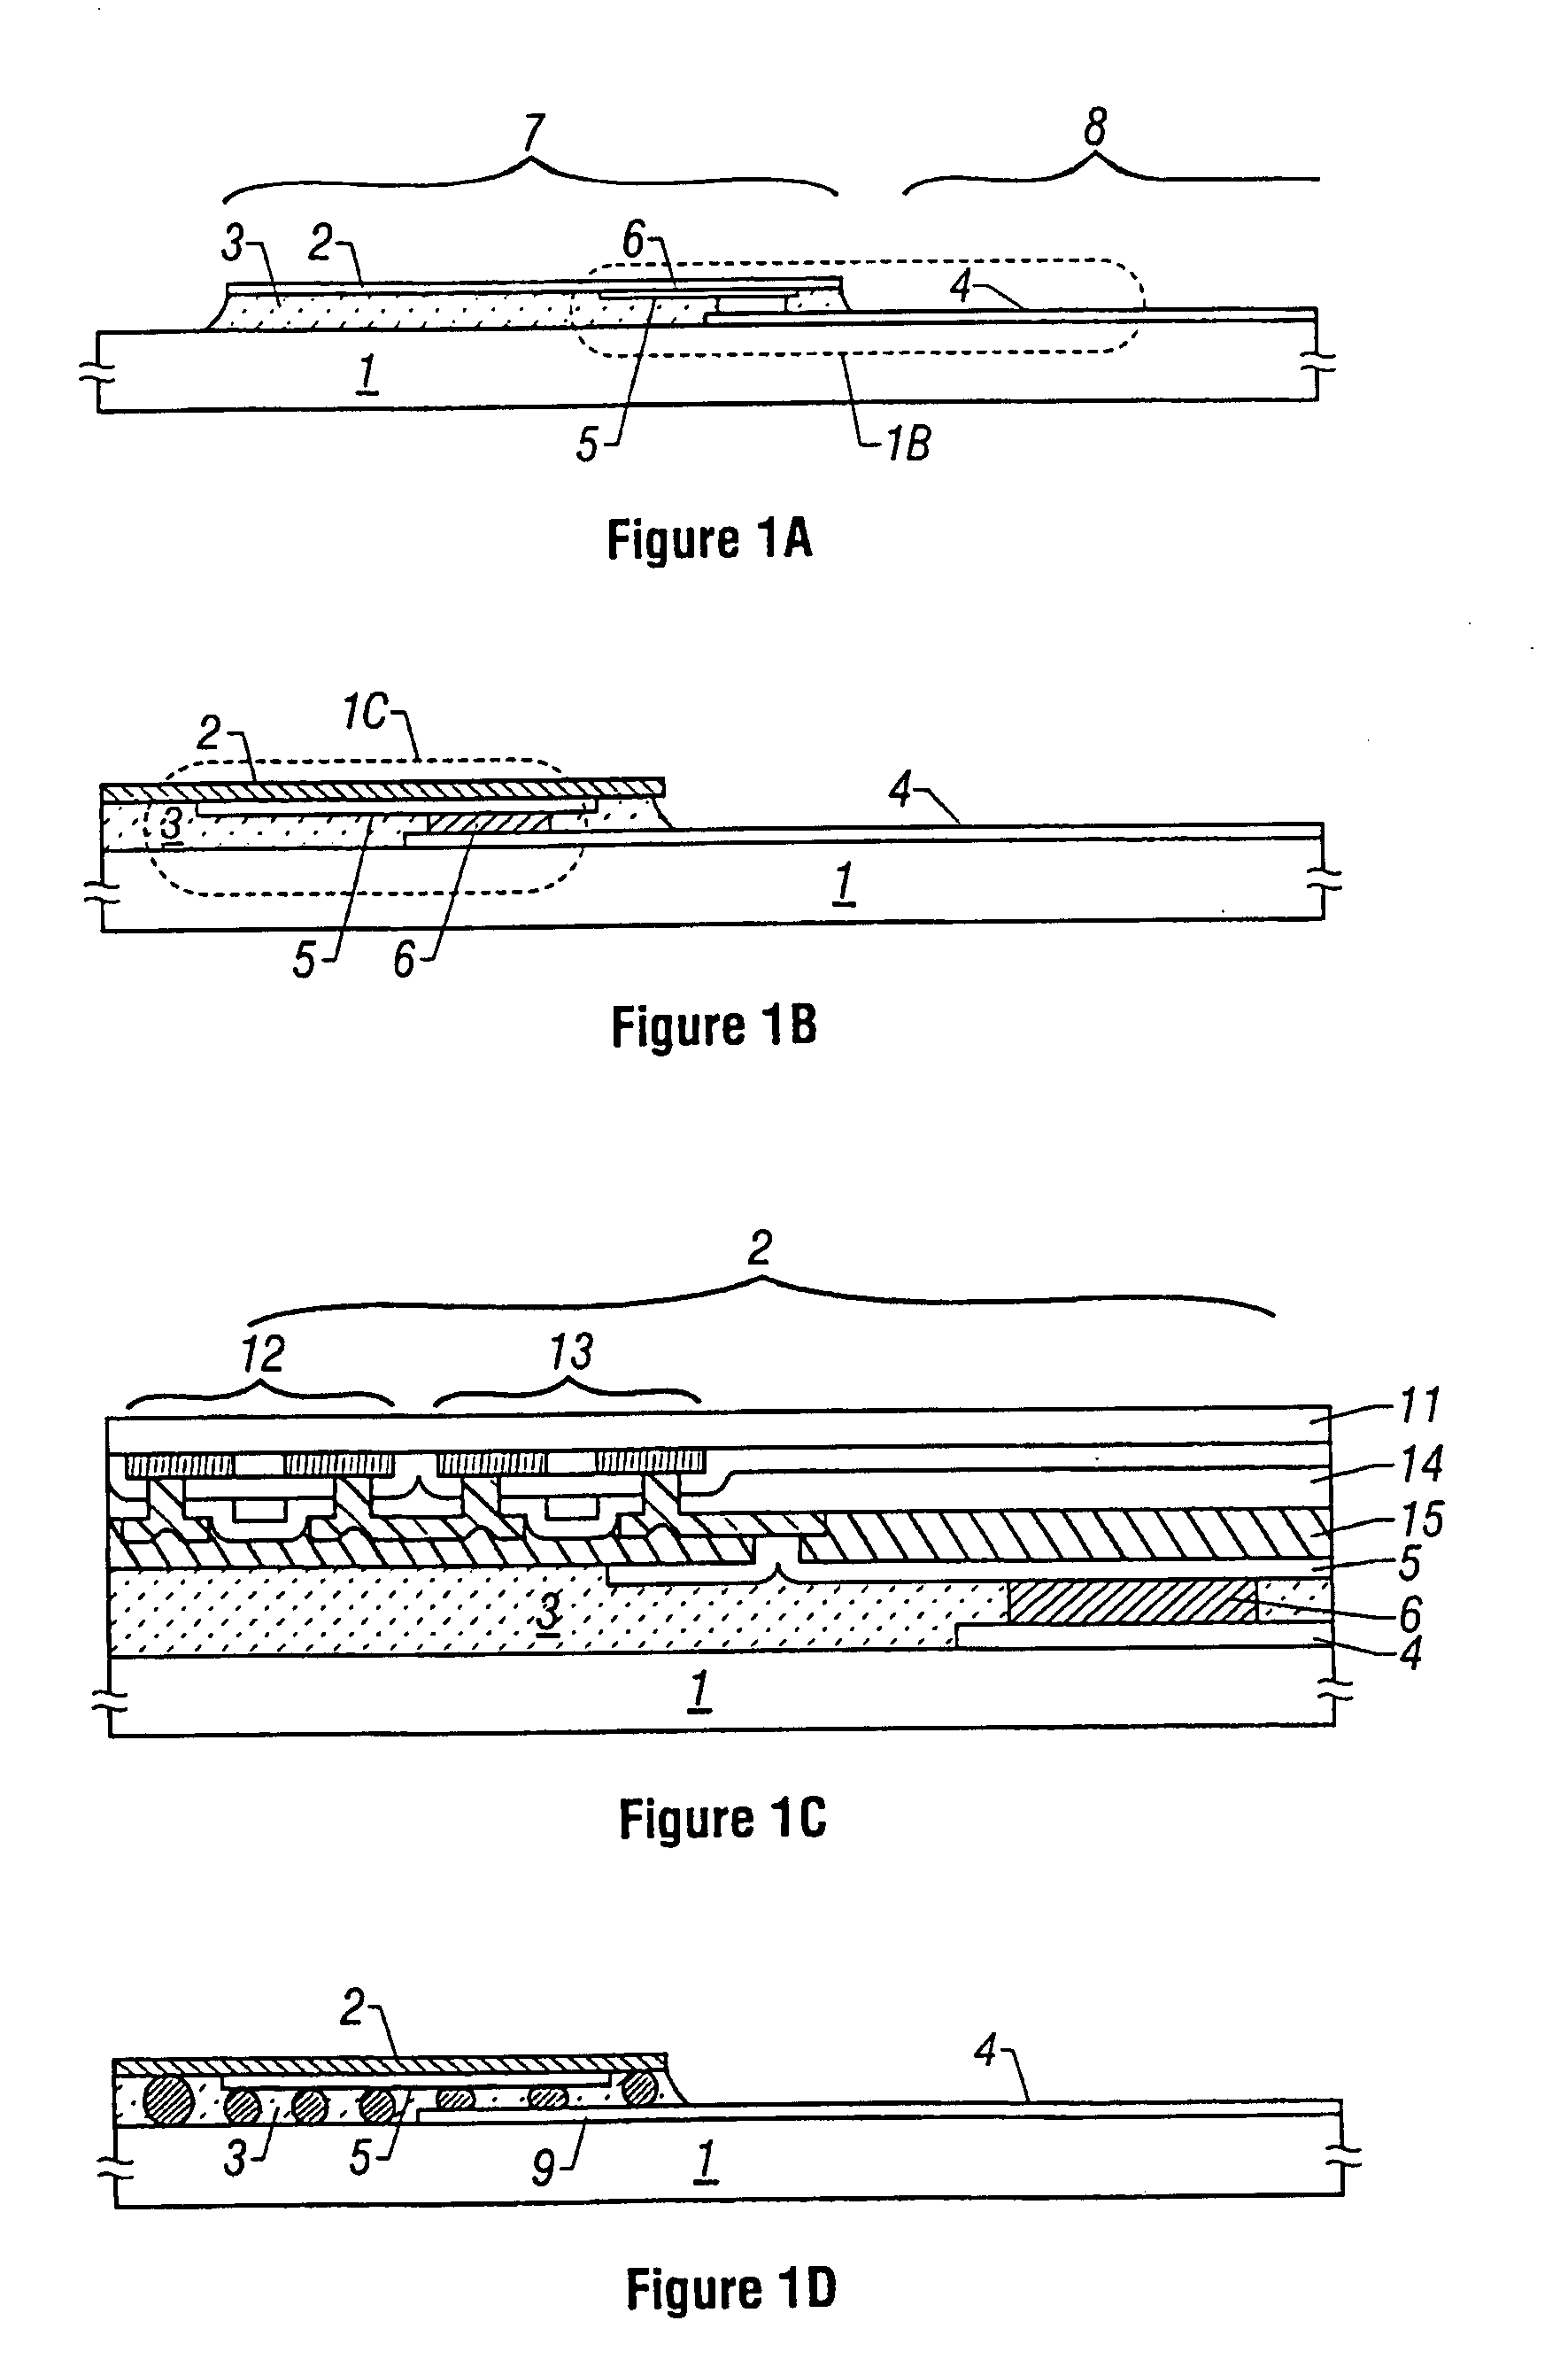 Method of manufacturing a display device having a driver circuit attached to a display substrate